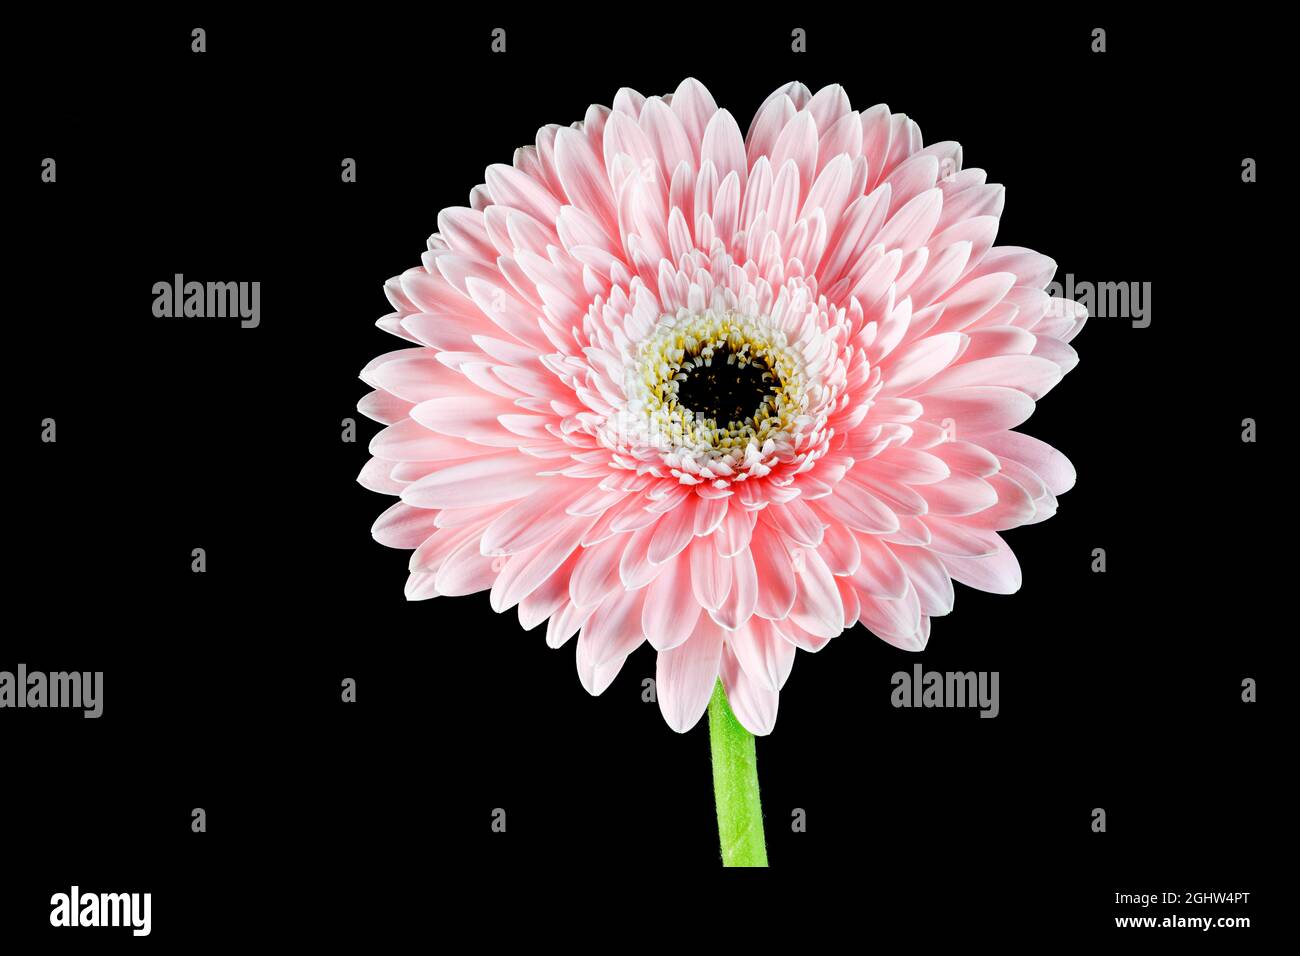 Gorgeous pink Gerbera flower photographed against a plain black background Stock Photo